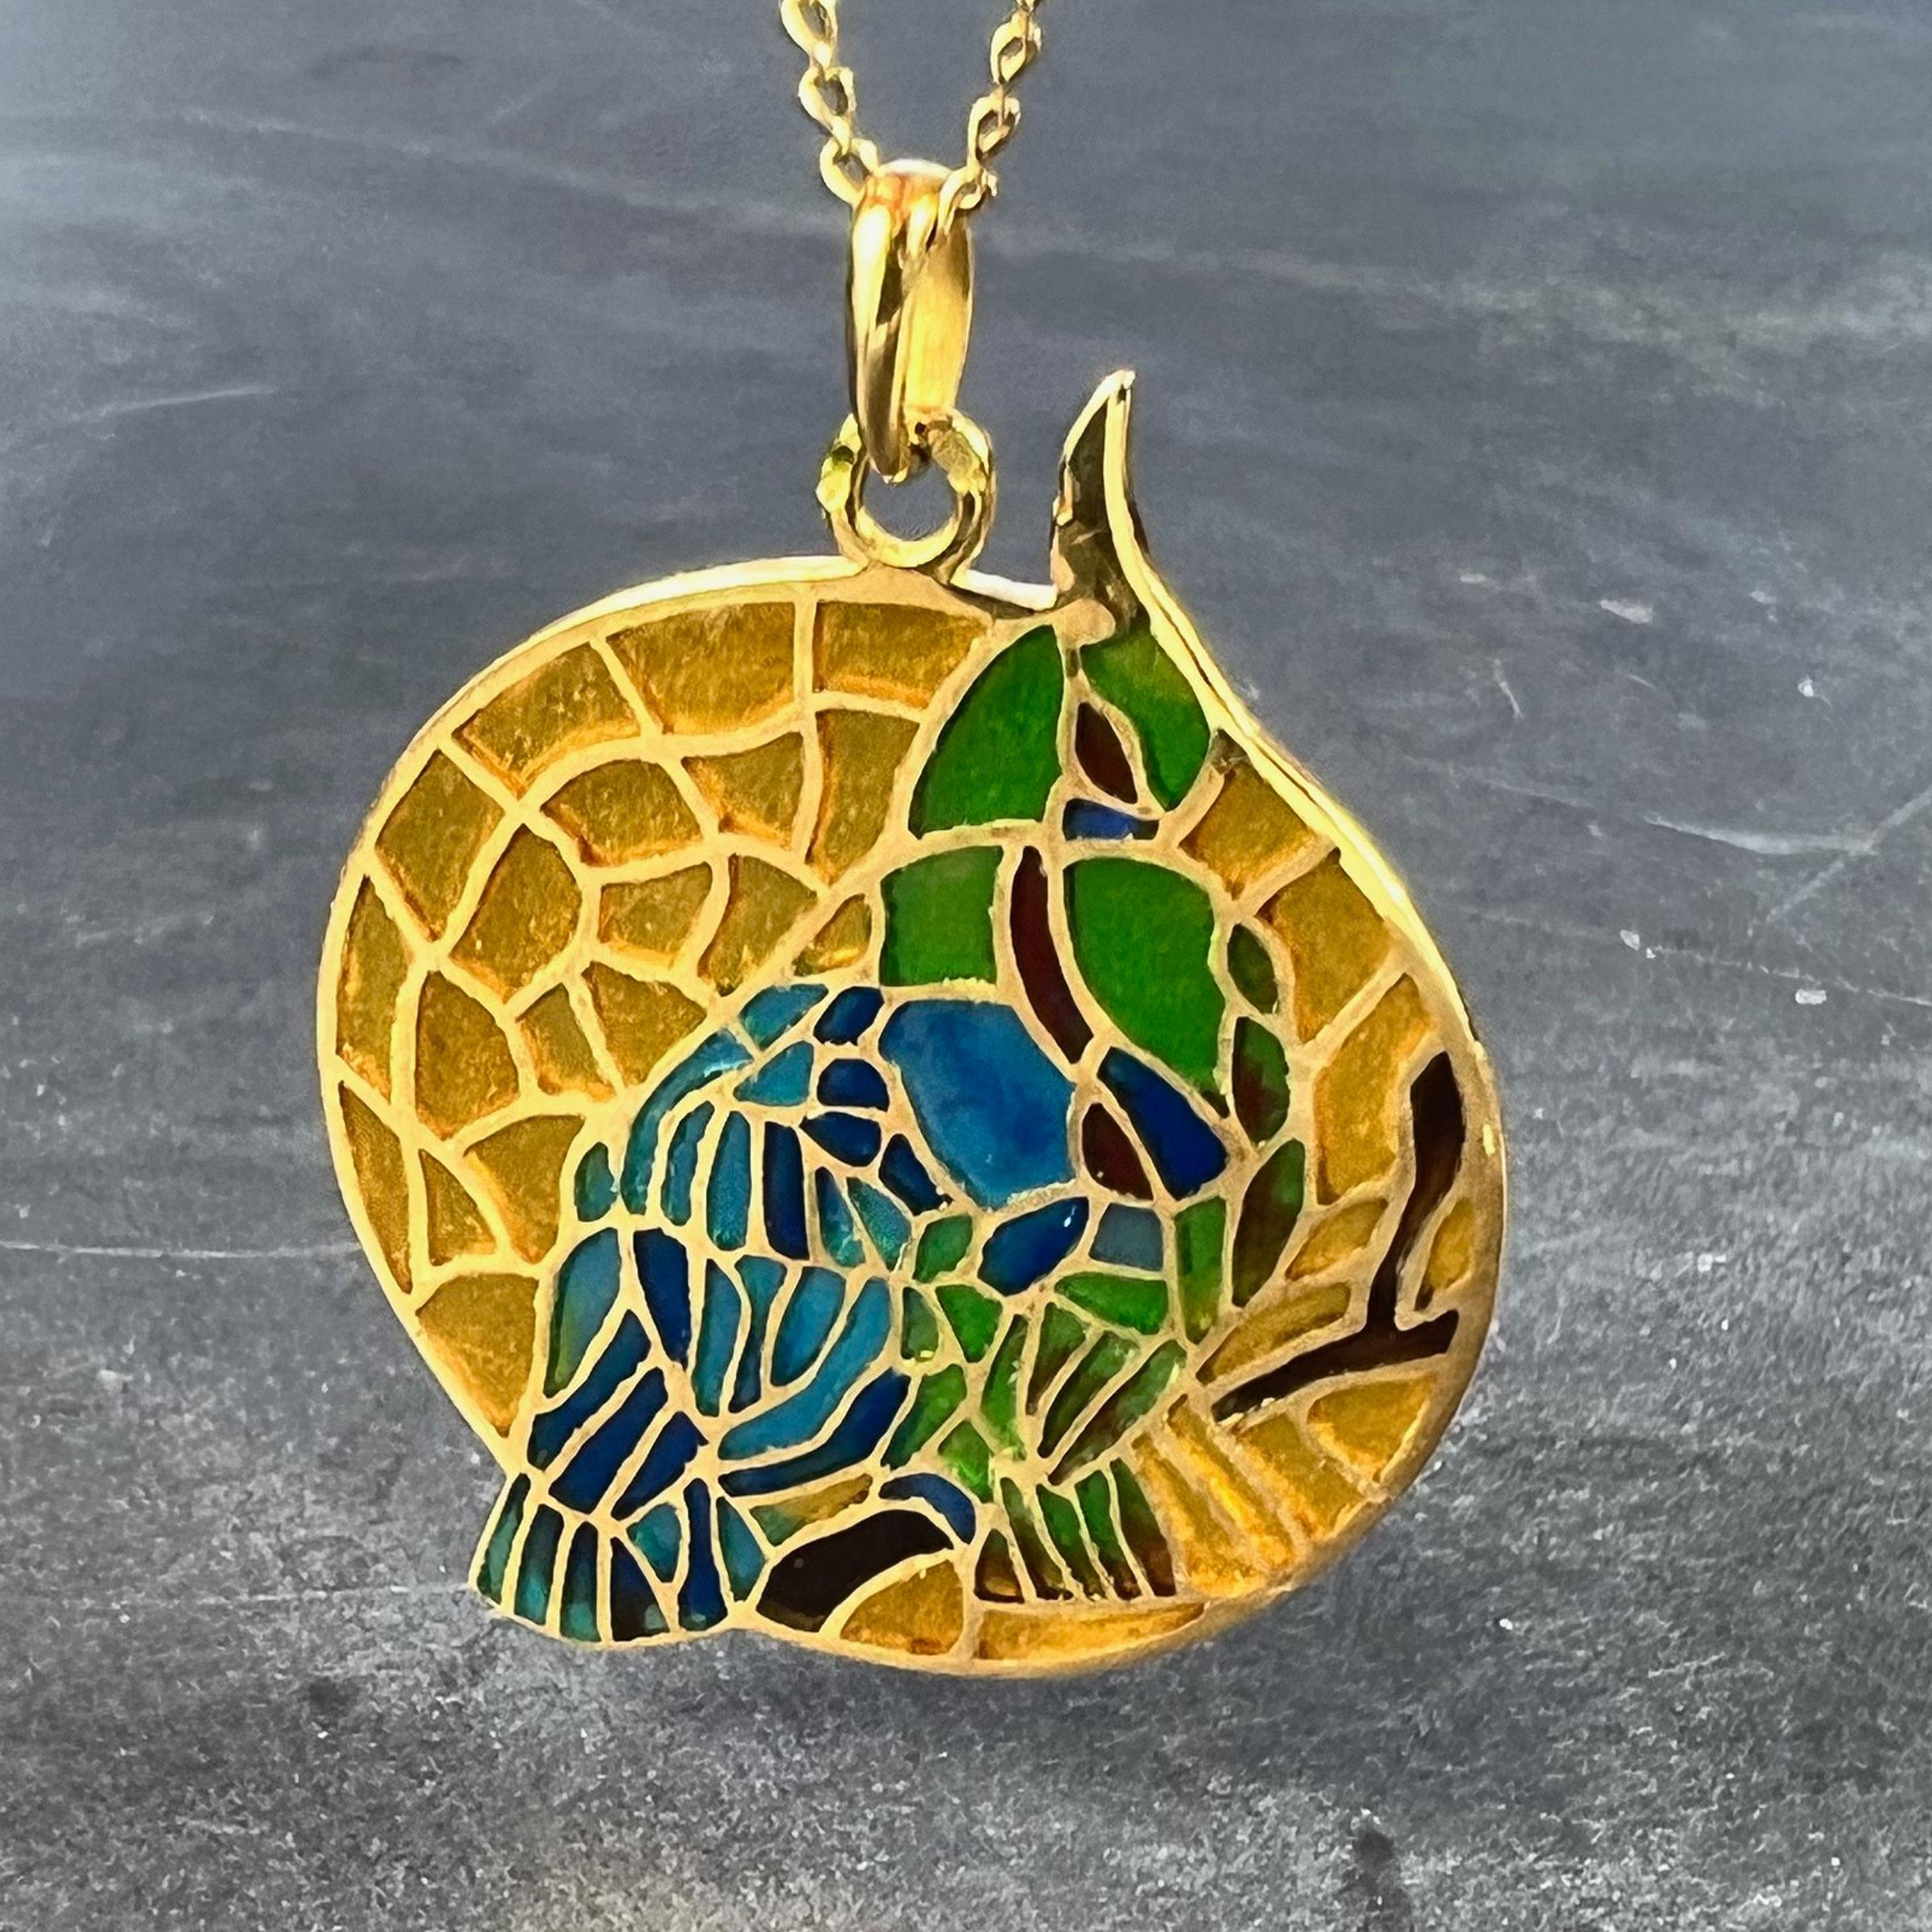 A French 18 karat (18K) yellow gold charm pendant designed as a round medal depicting a blue and green bird on a yellow background in plique-a-jour enamel. Stamped with the eagle’s head for 18 karat gold and French manufacture, and a partial maker's